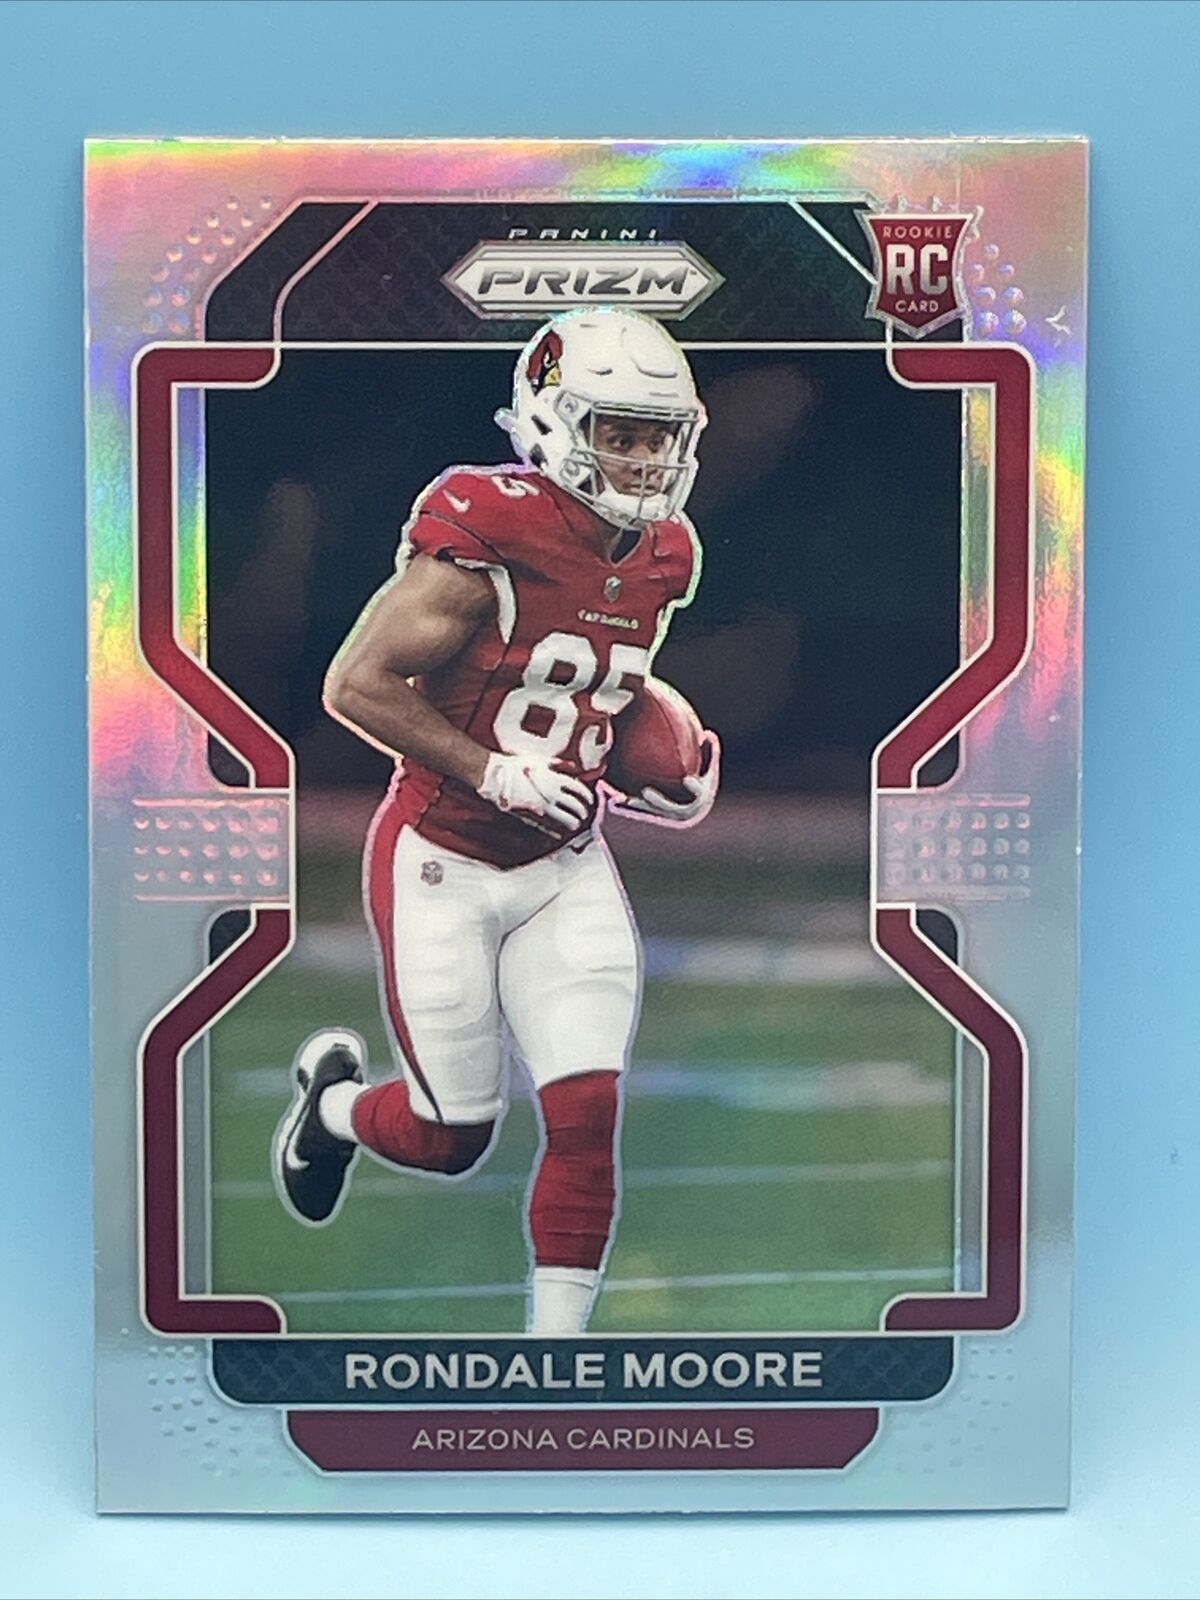 RONDALE MOORE 🏈 2021 Panini Prizm Silver Variation Rookie V-347 RC Cardinals